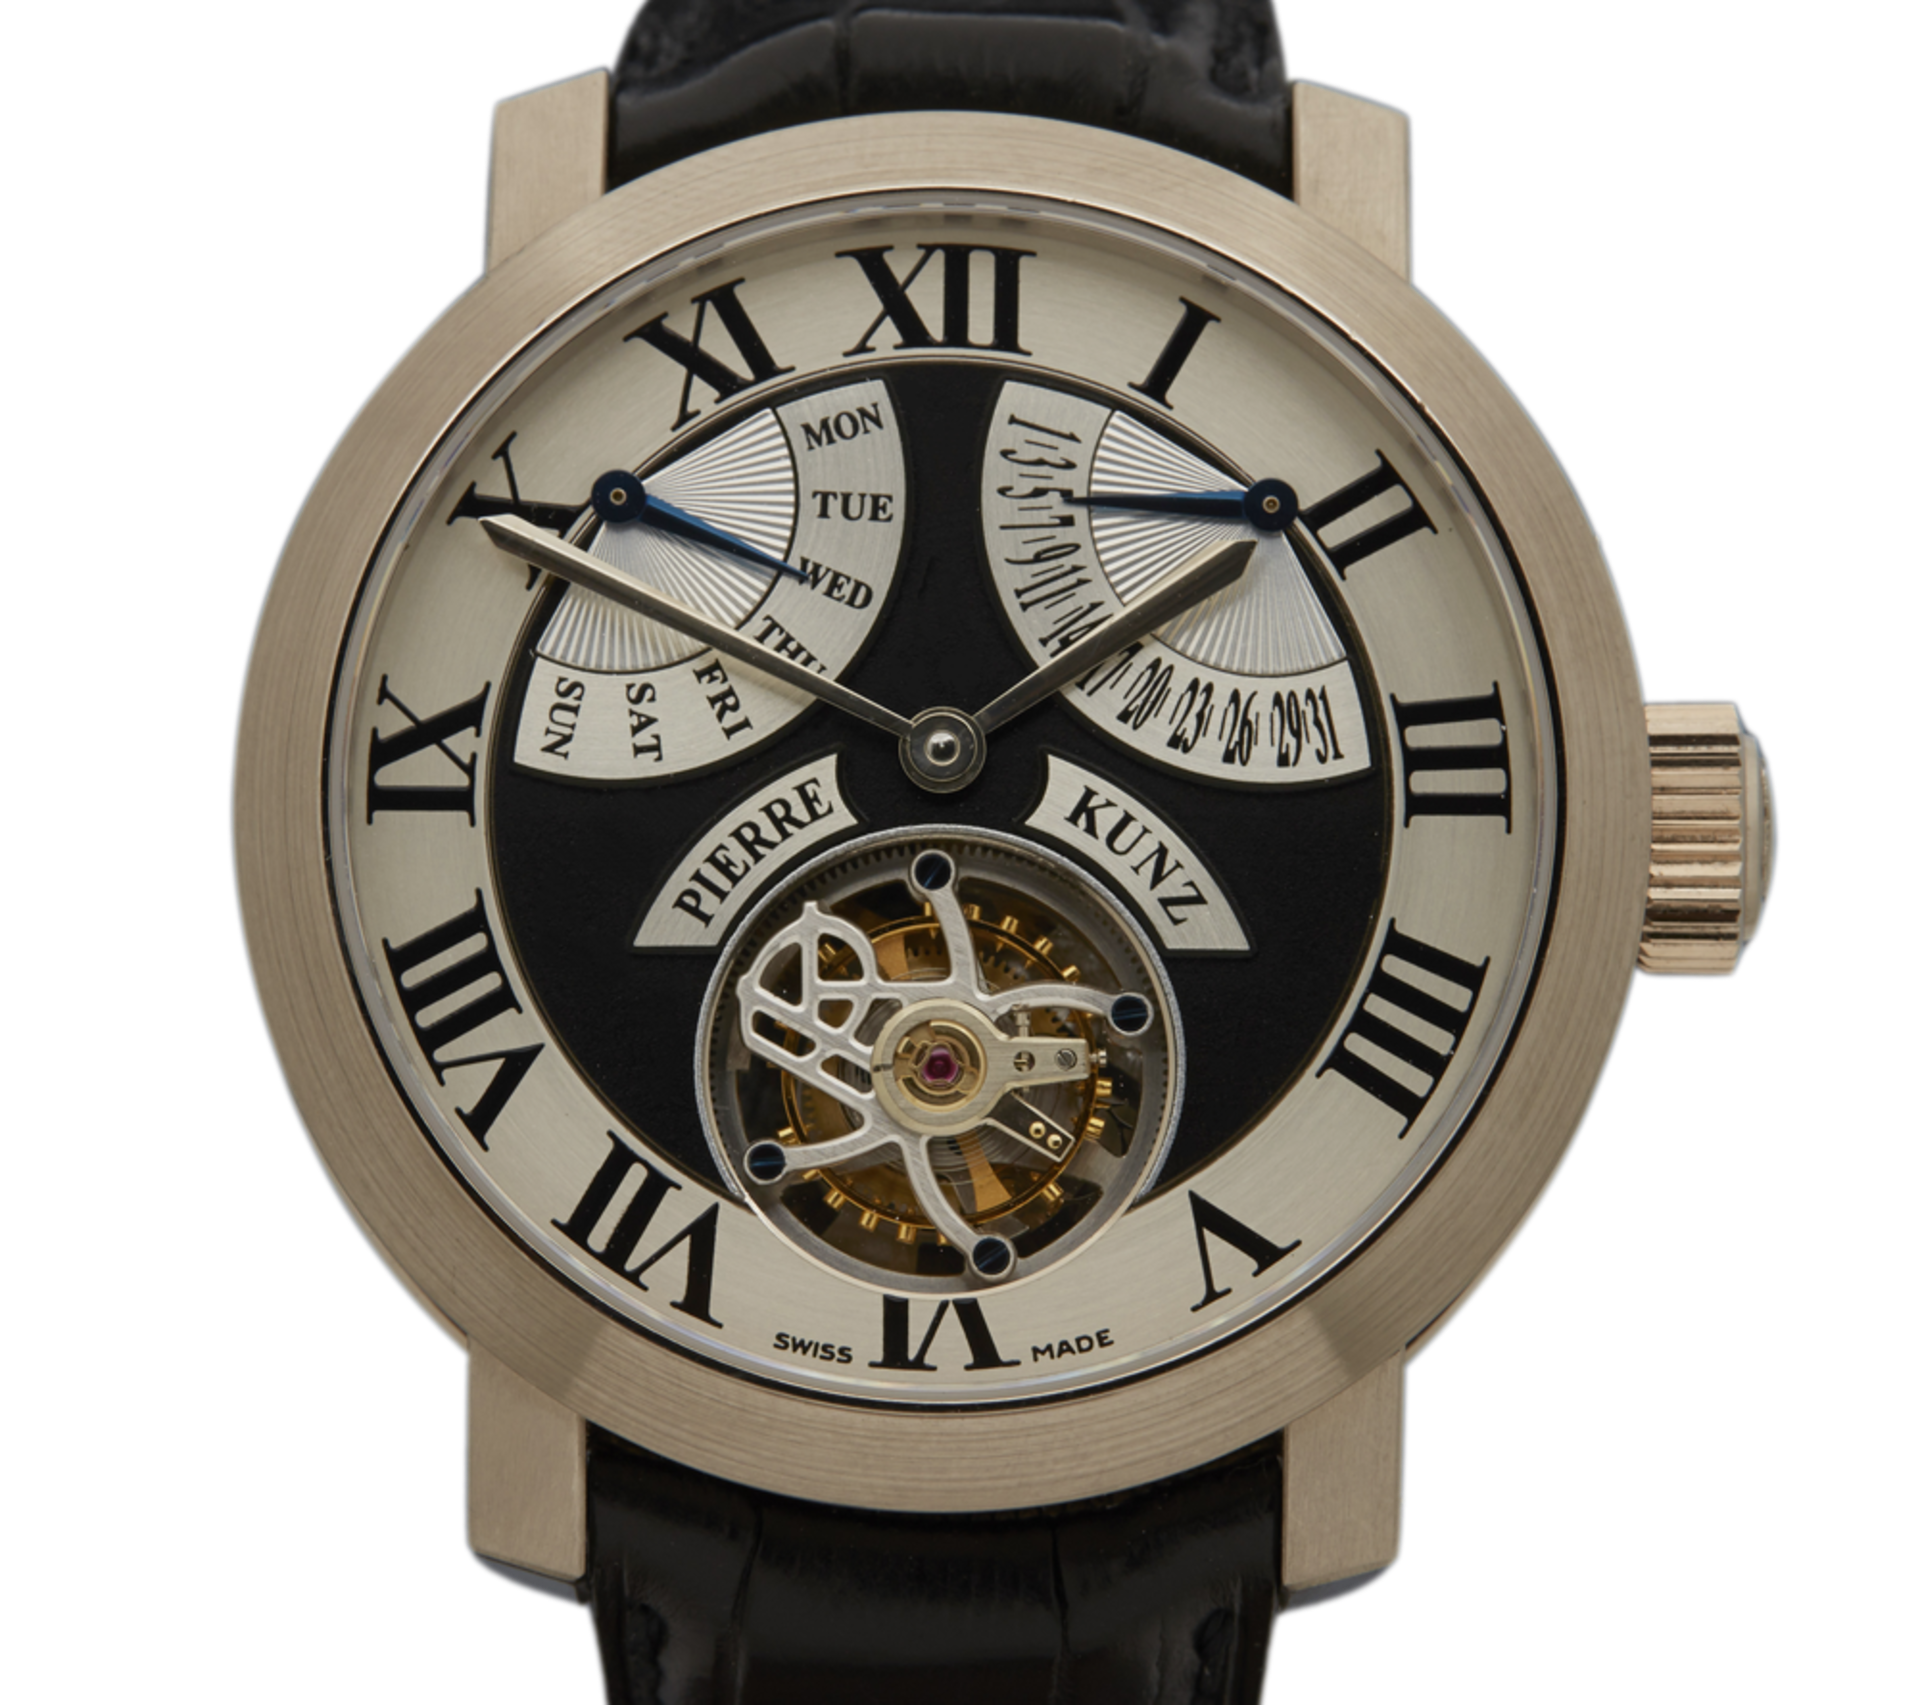 Pierre Kunz, Tourbillon Limited Edition Day Date 41mm 18k White Gold - Image 3 of 11